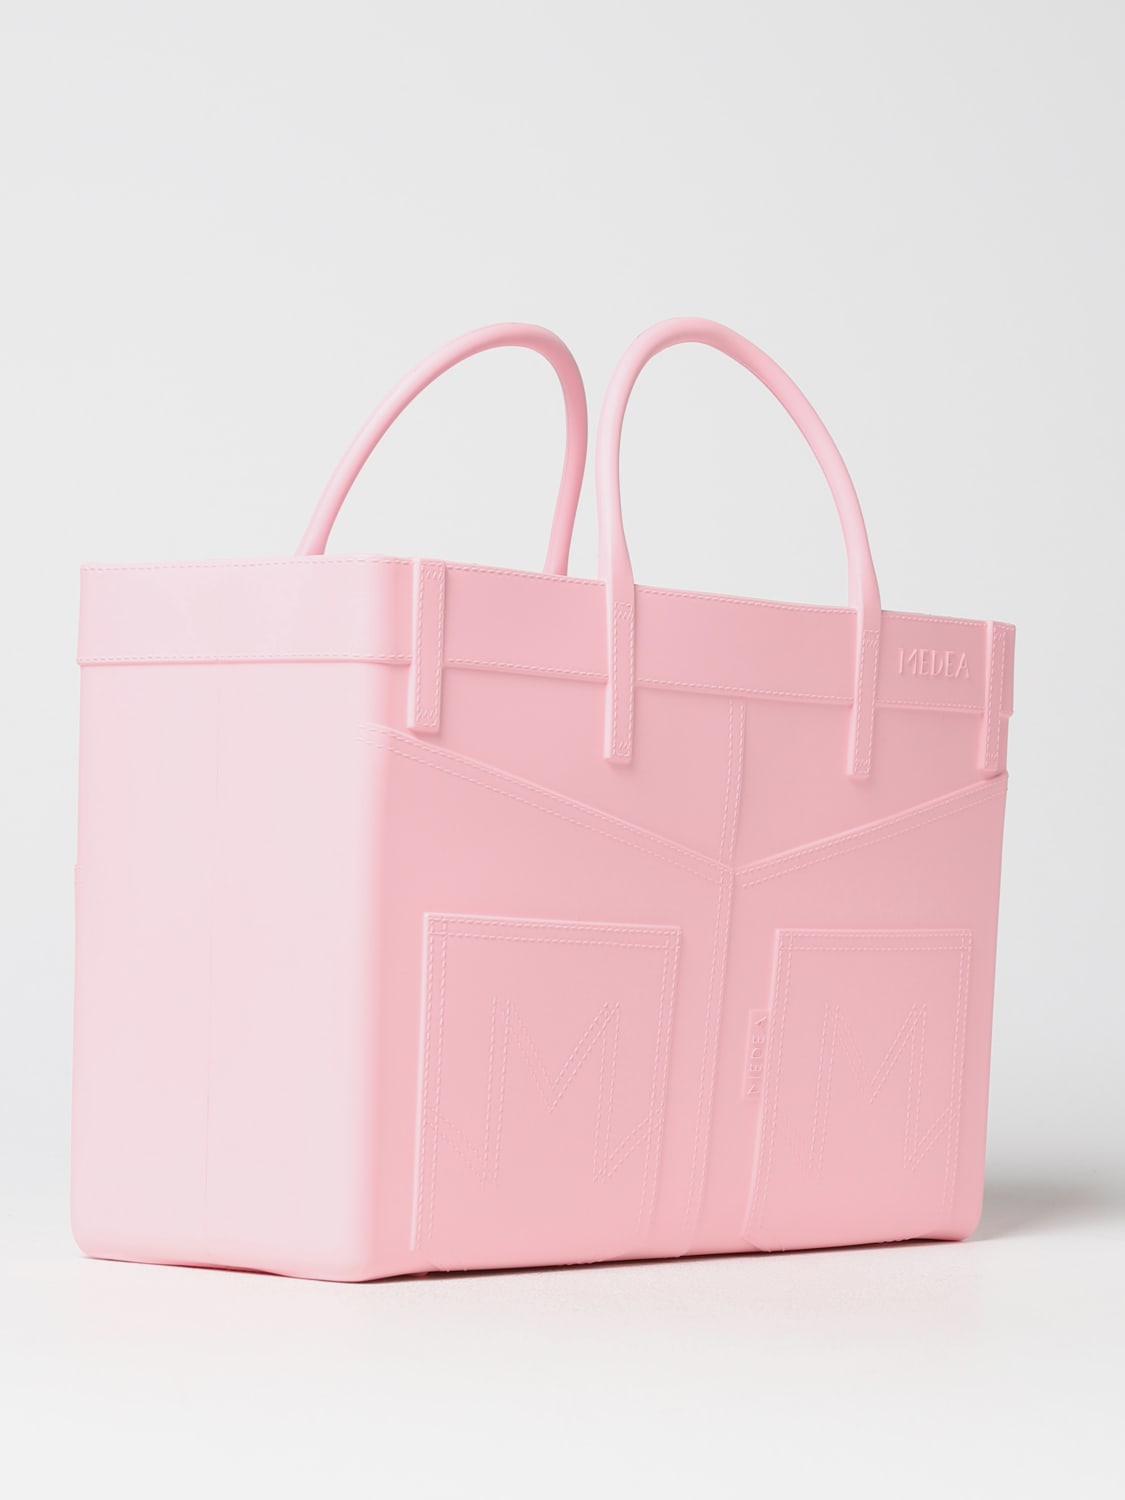 Medea Outlet: tote bags for woman - Pink | Medea tote bags